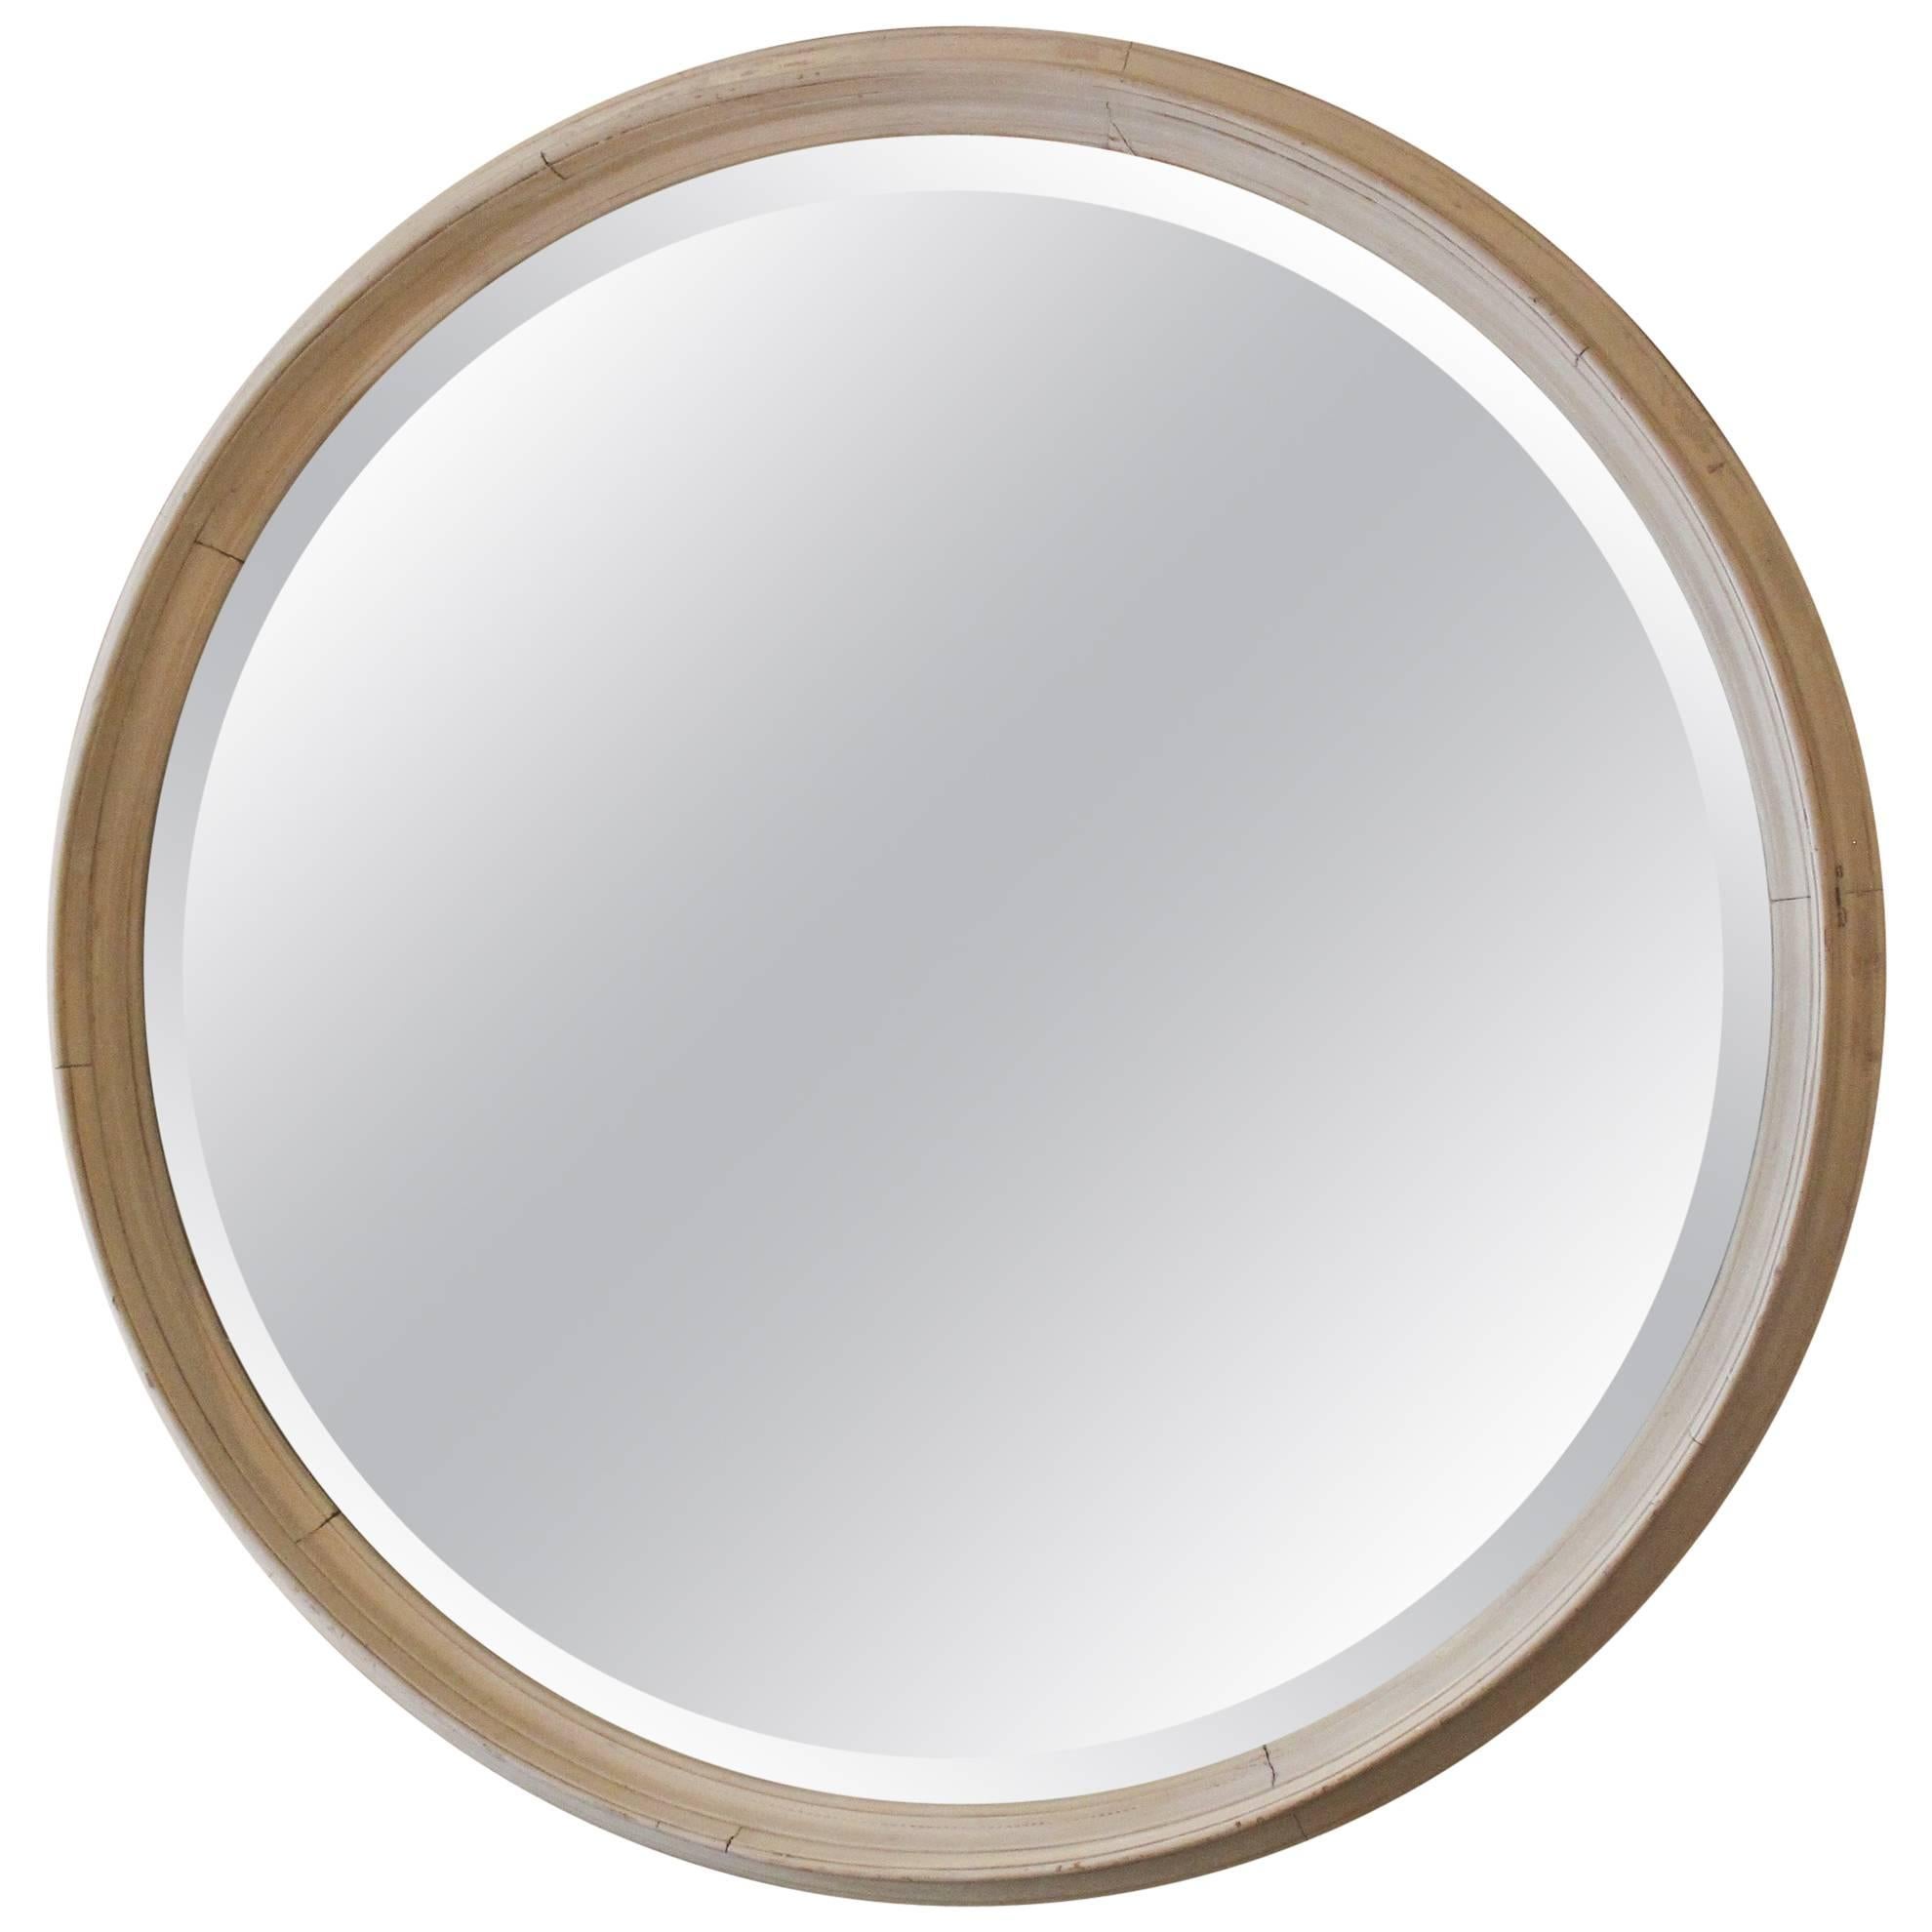 Outsized Round Painted Wall Mirror